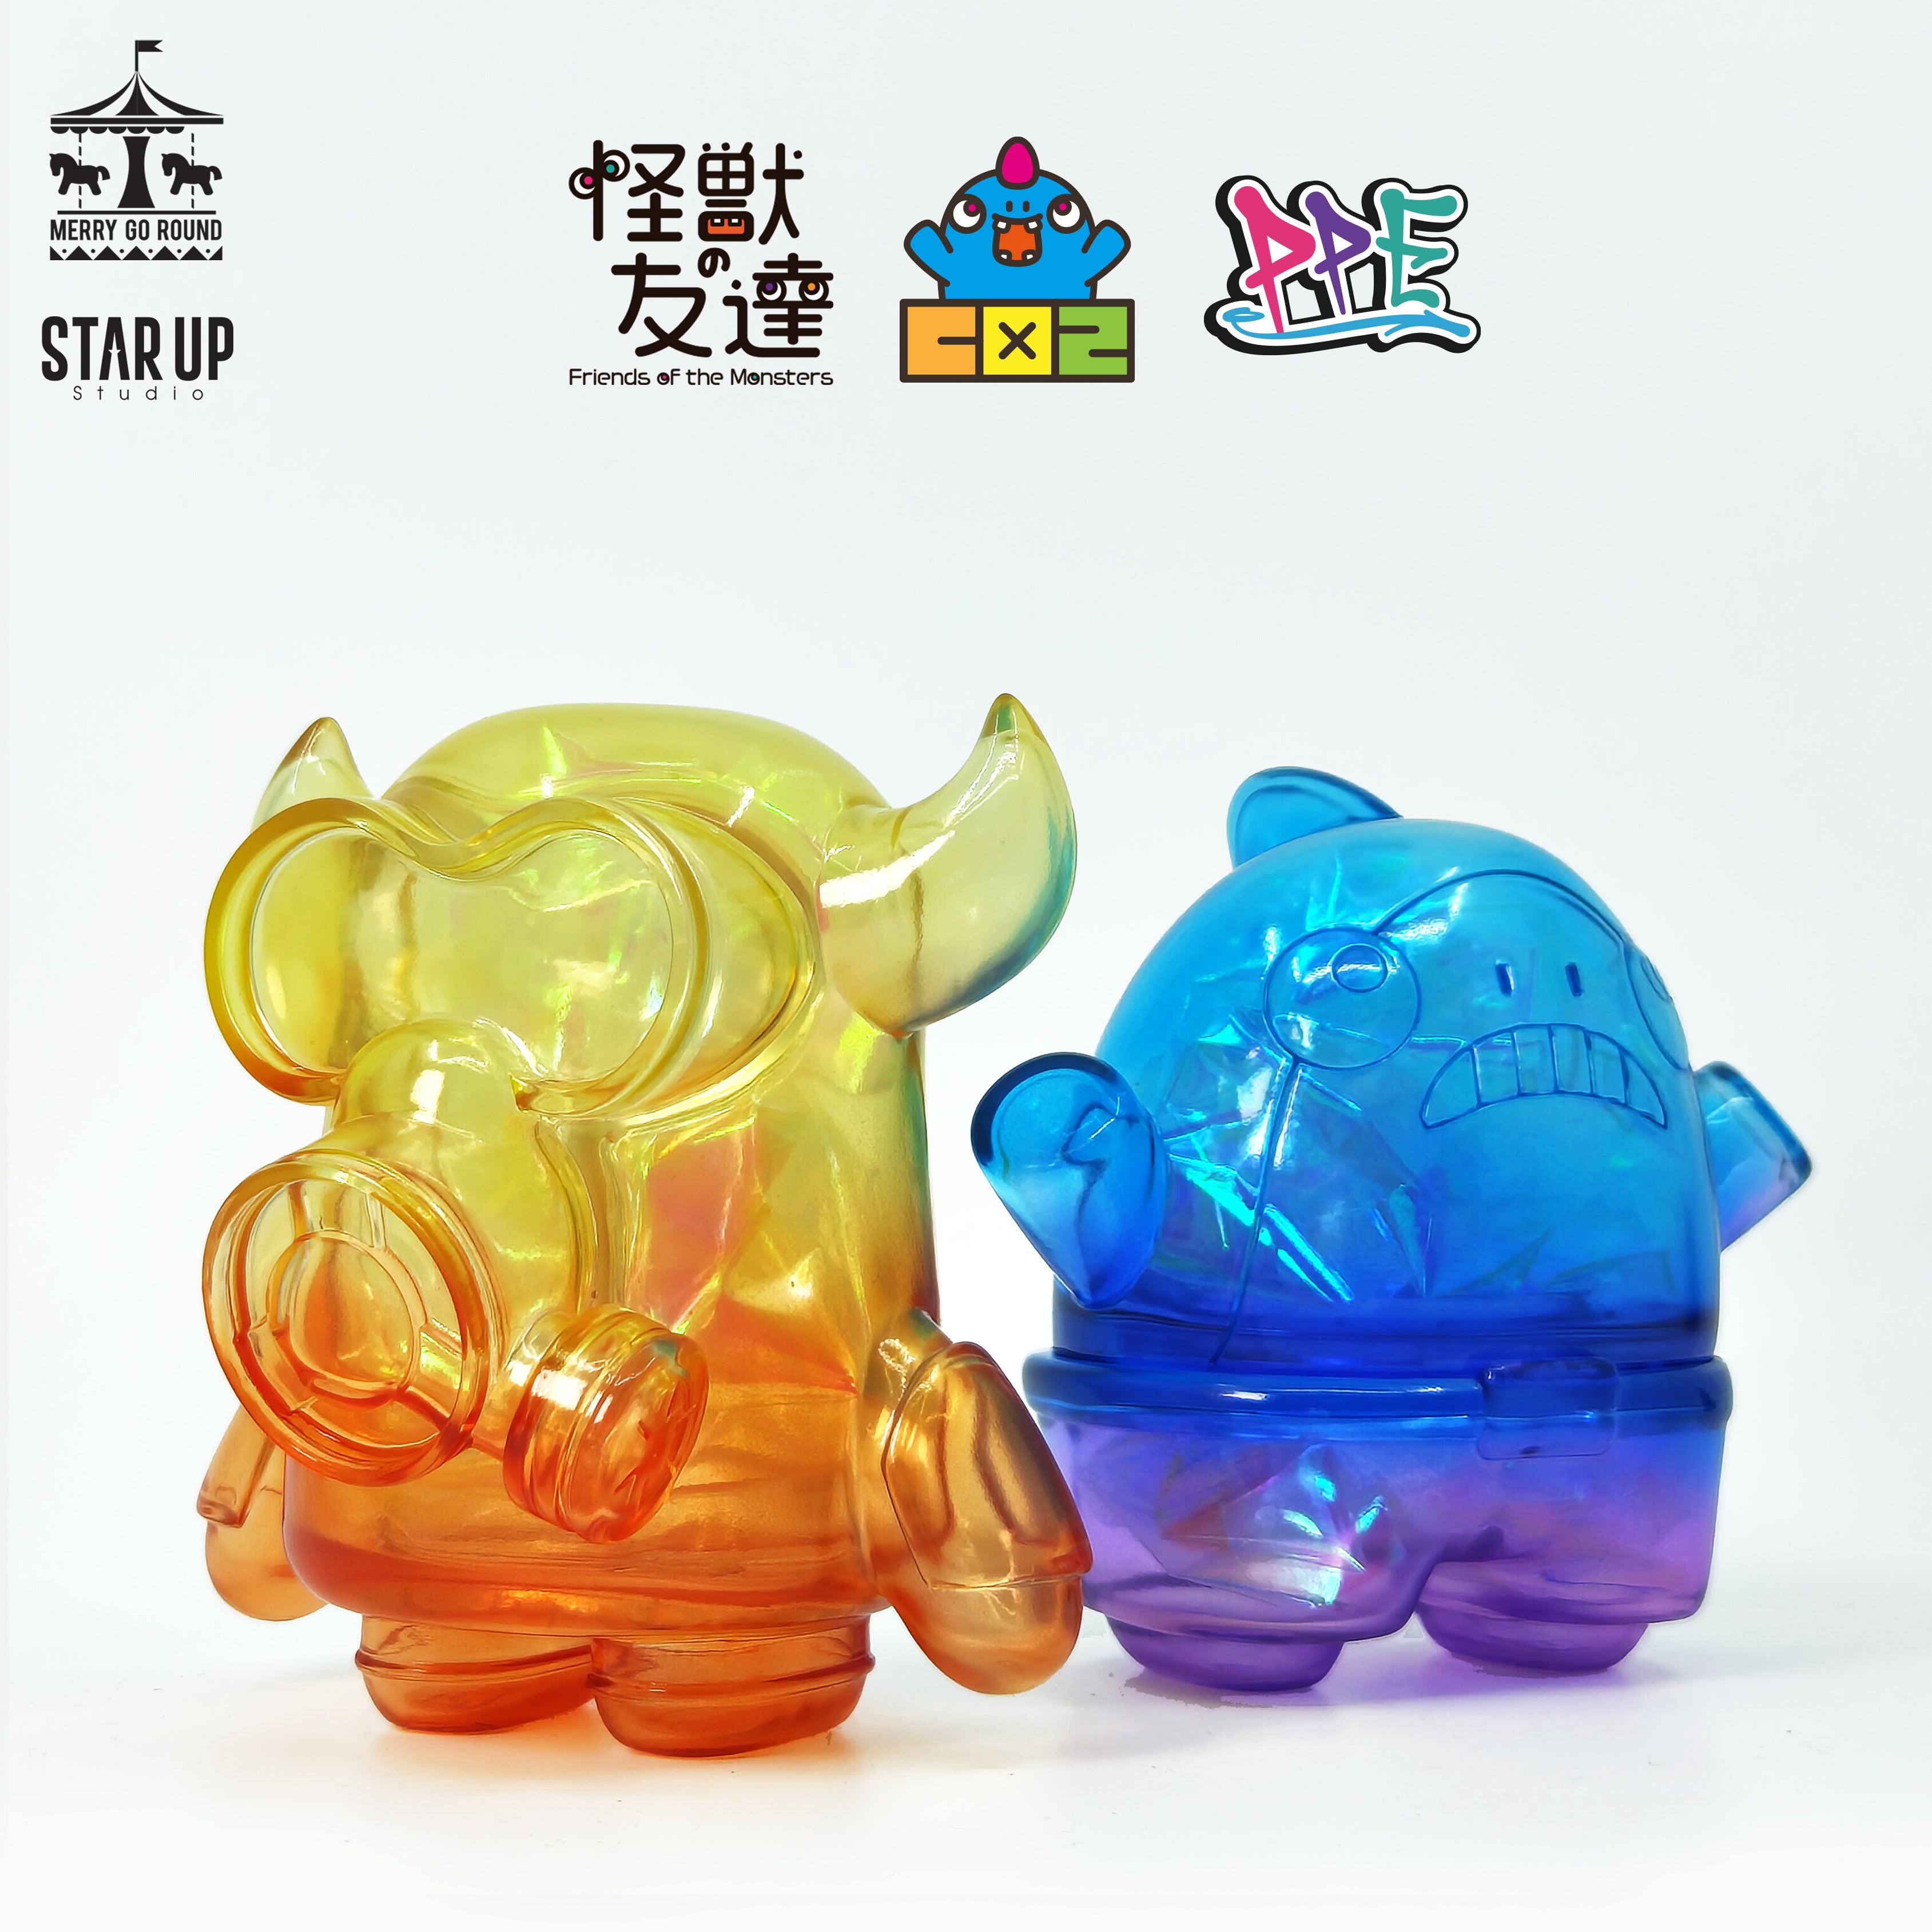 SHARK & MUSK BULL toy with cartoon animal figures and a piggy bank container, by Takanori Komishi, soft vinyl 6.